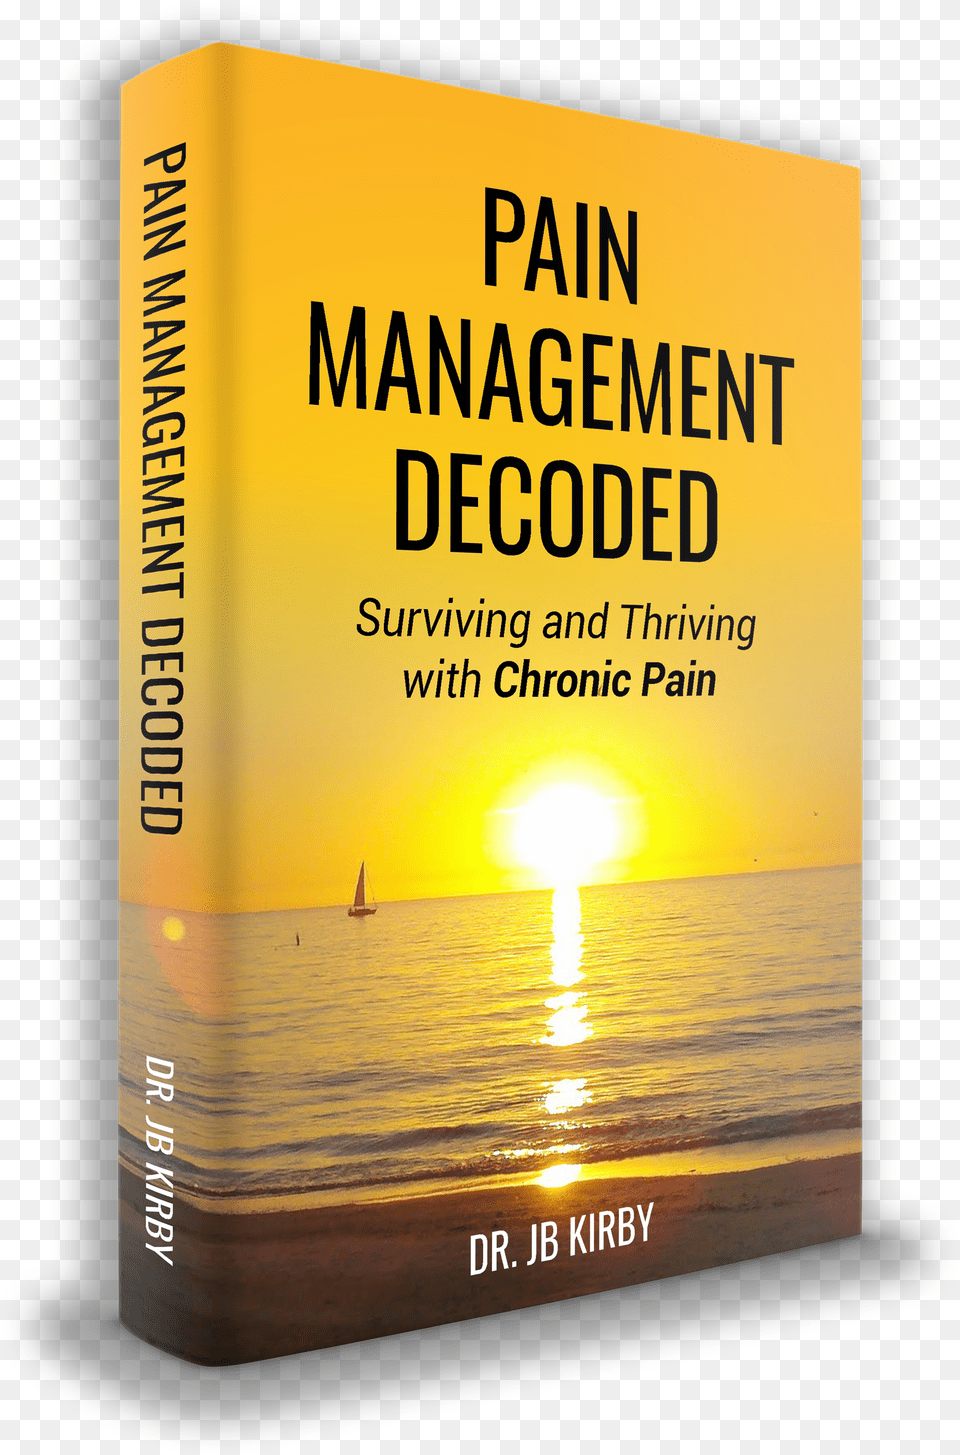 Pain Management Decoded By Dr Jb Kirby Wealth Distribution In America 2011, Book, Novel, Publication, Boat Png Image